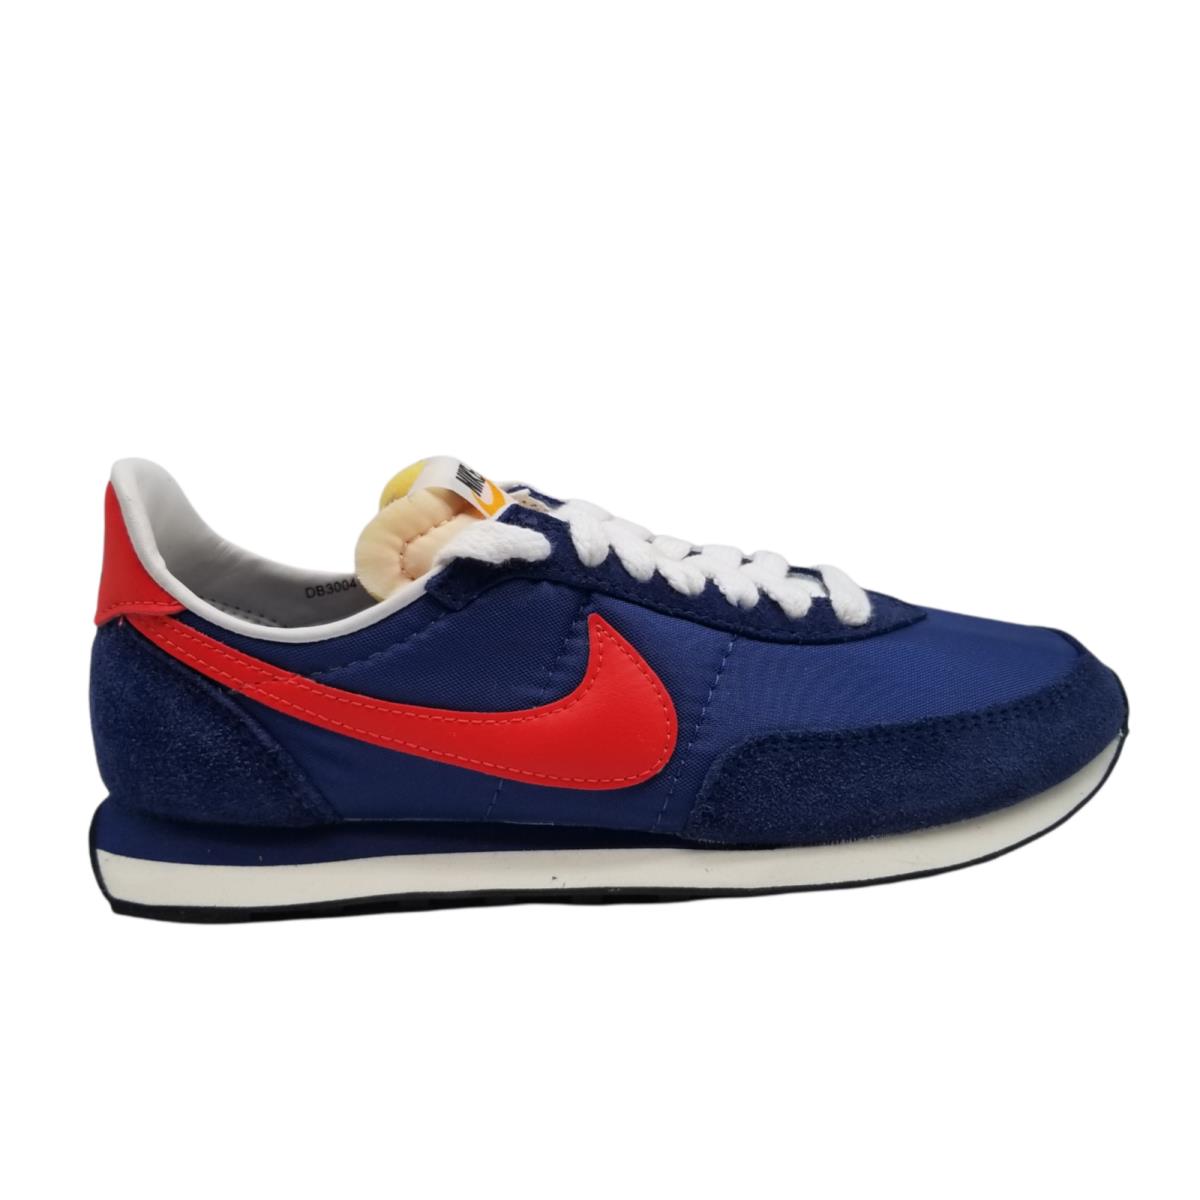 Nike Youth Waffle Trainer 2 SP Navy Blue Shoes Size 5